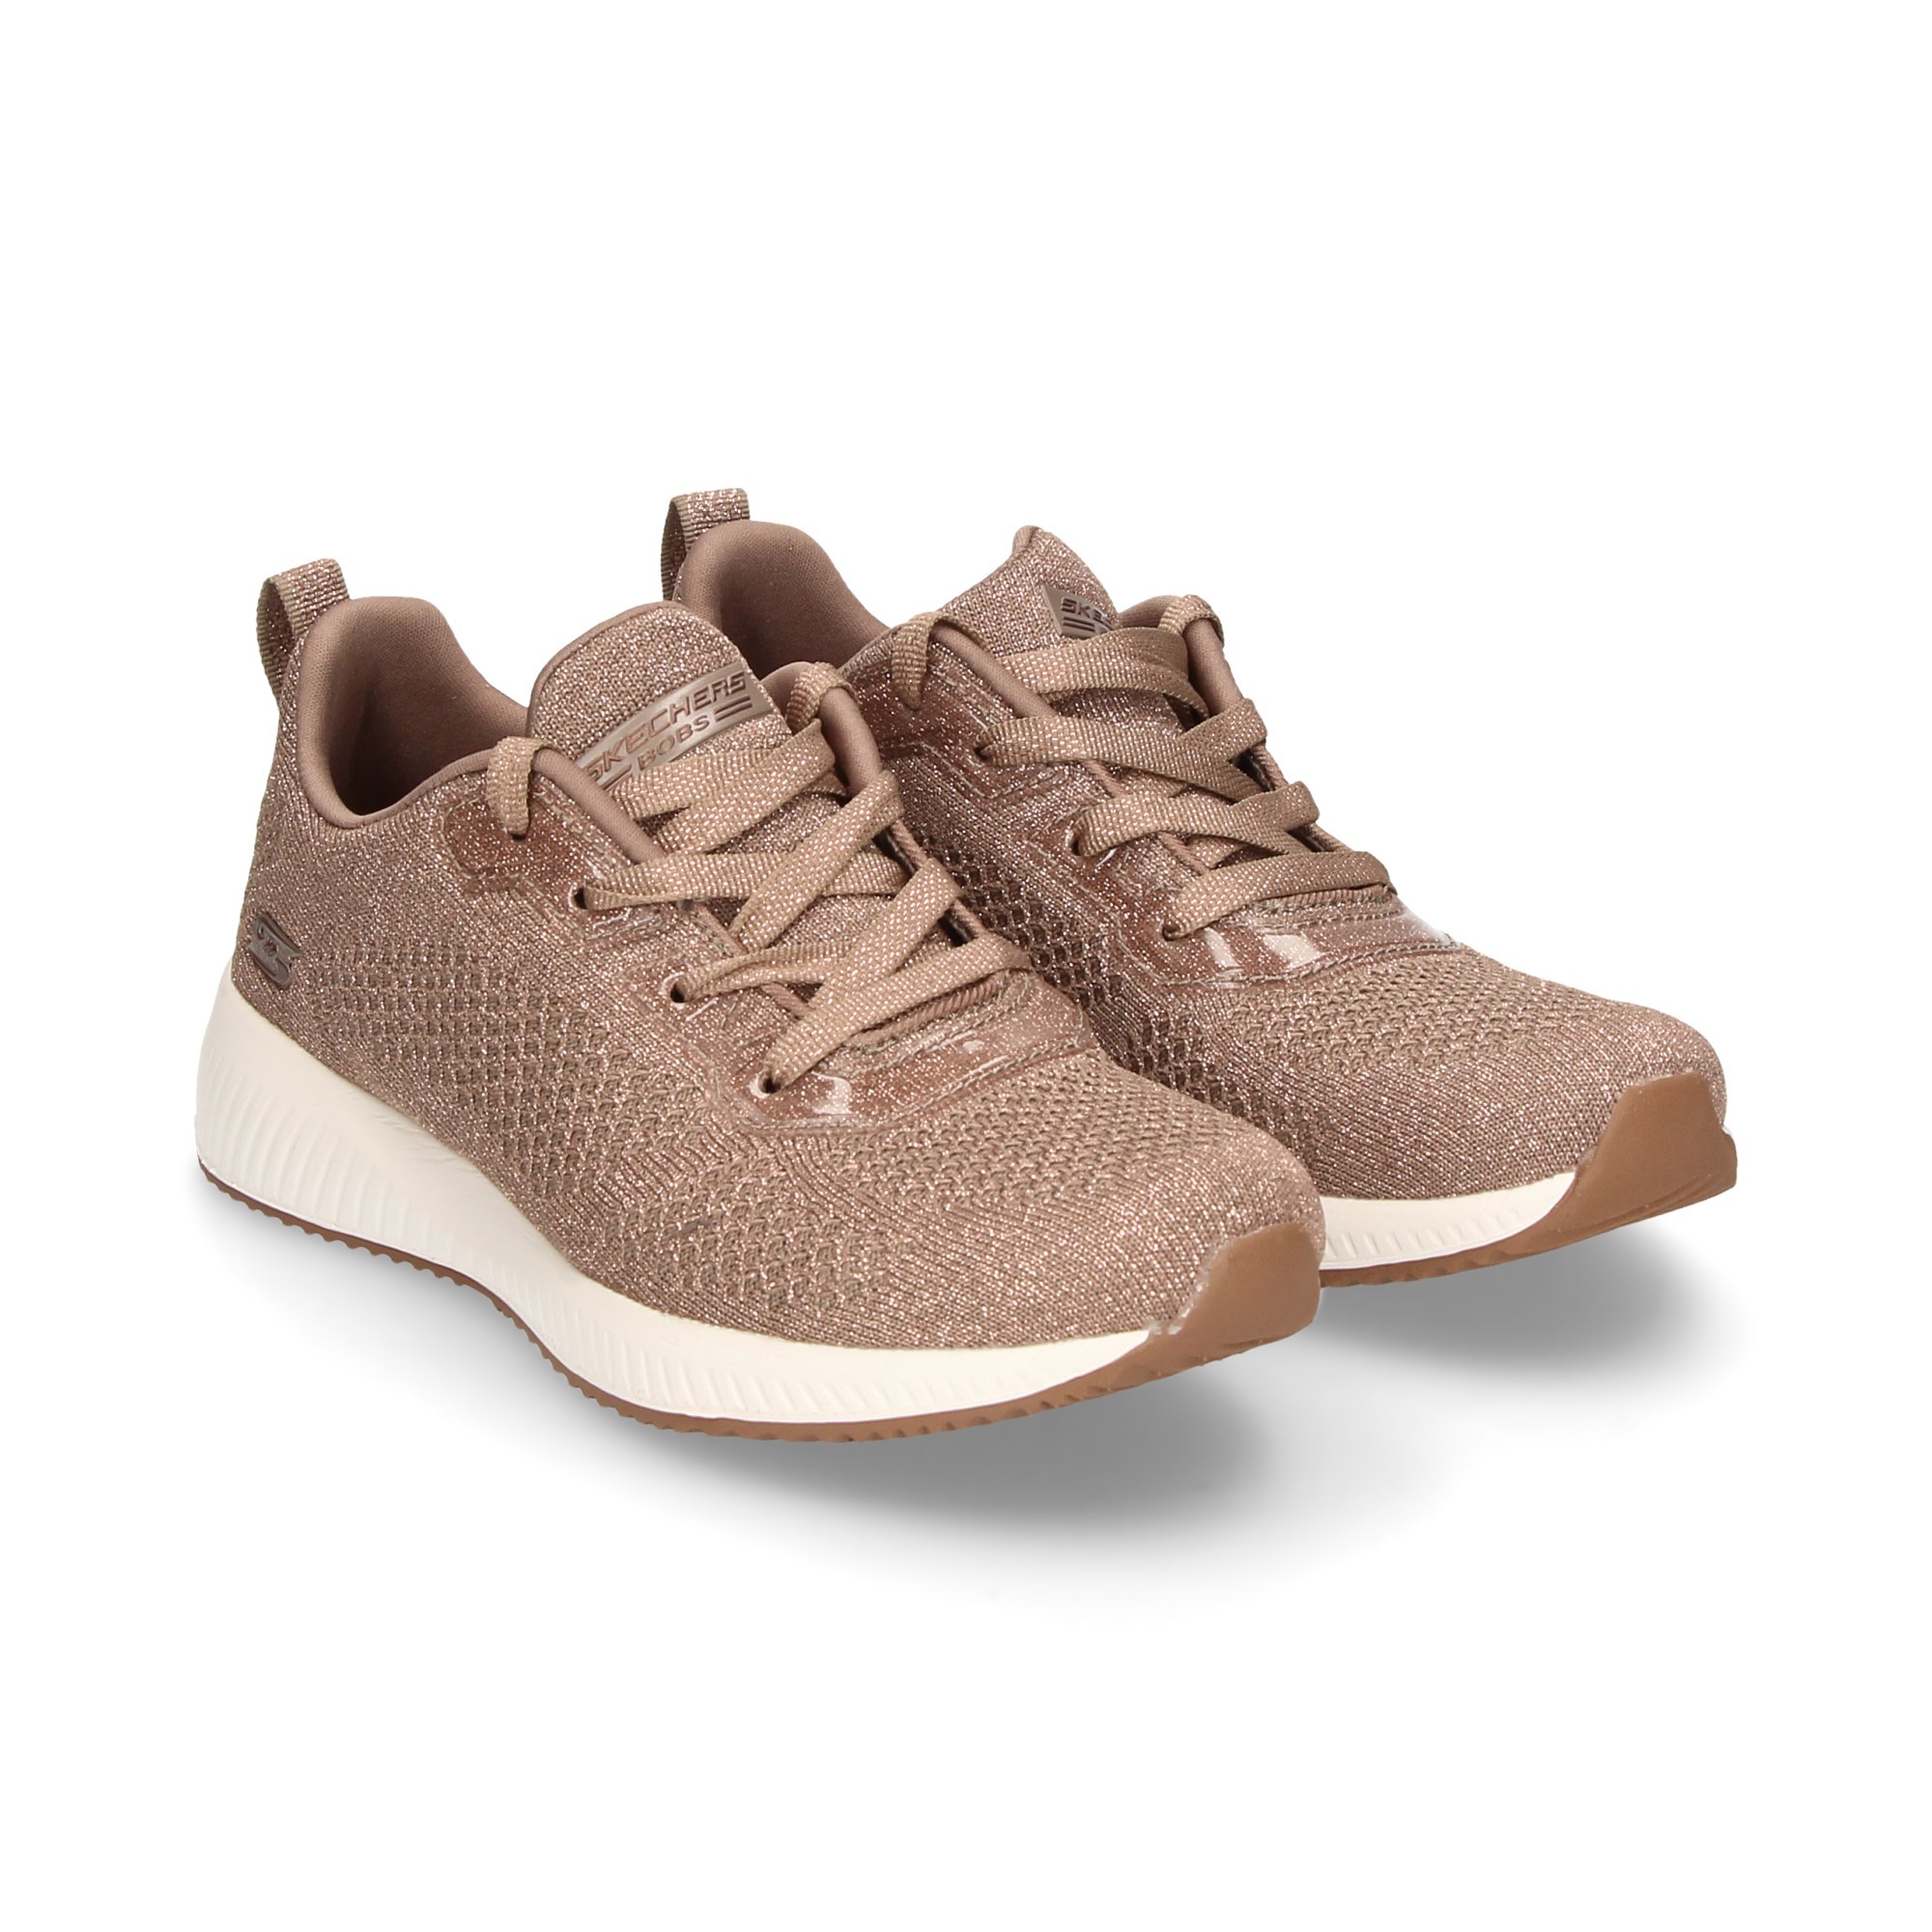 deportivo-textil-taupe